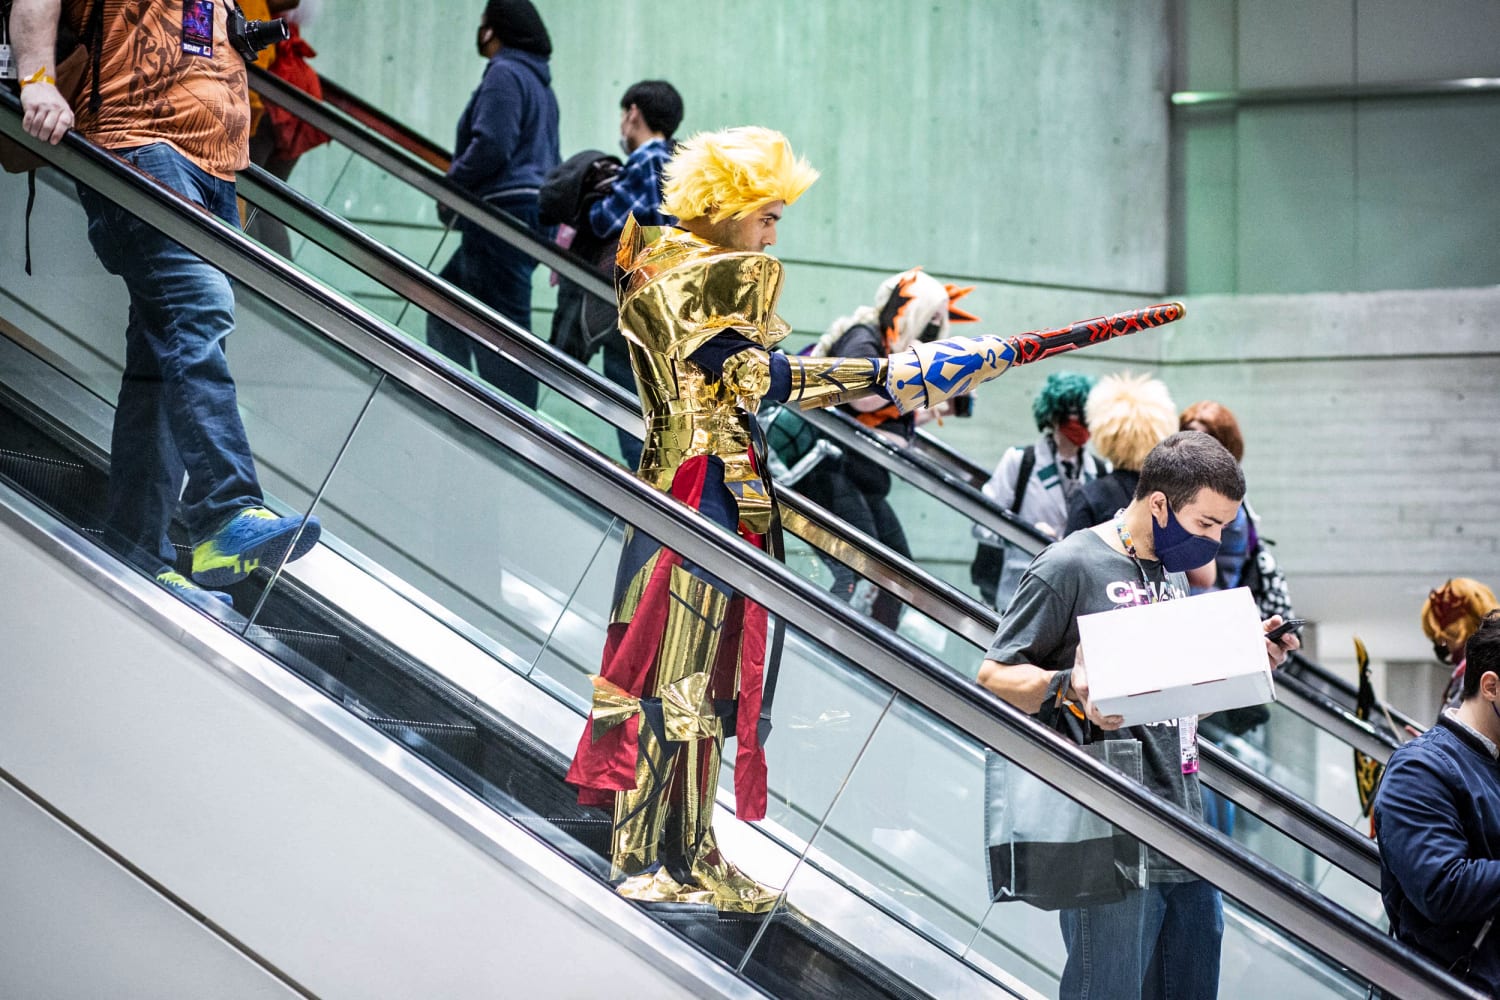 Biggest Anime Conventions in U.S. | Comic Cons 2023 Dates